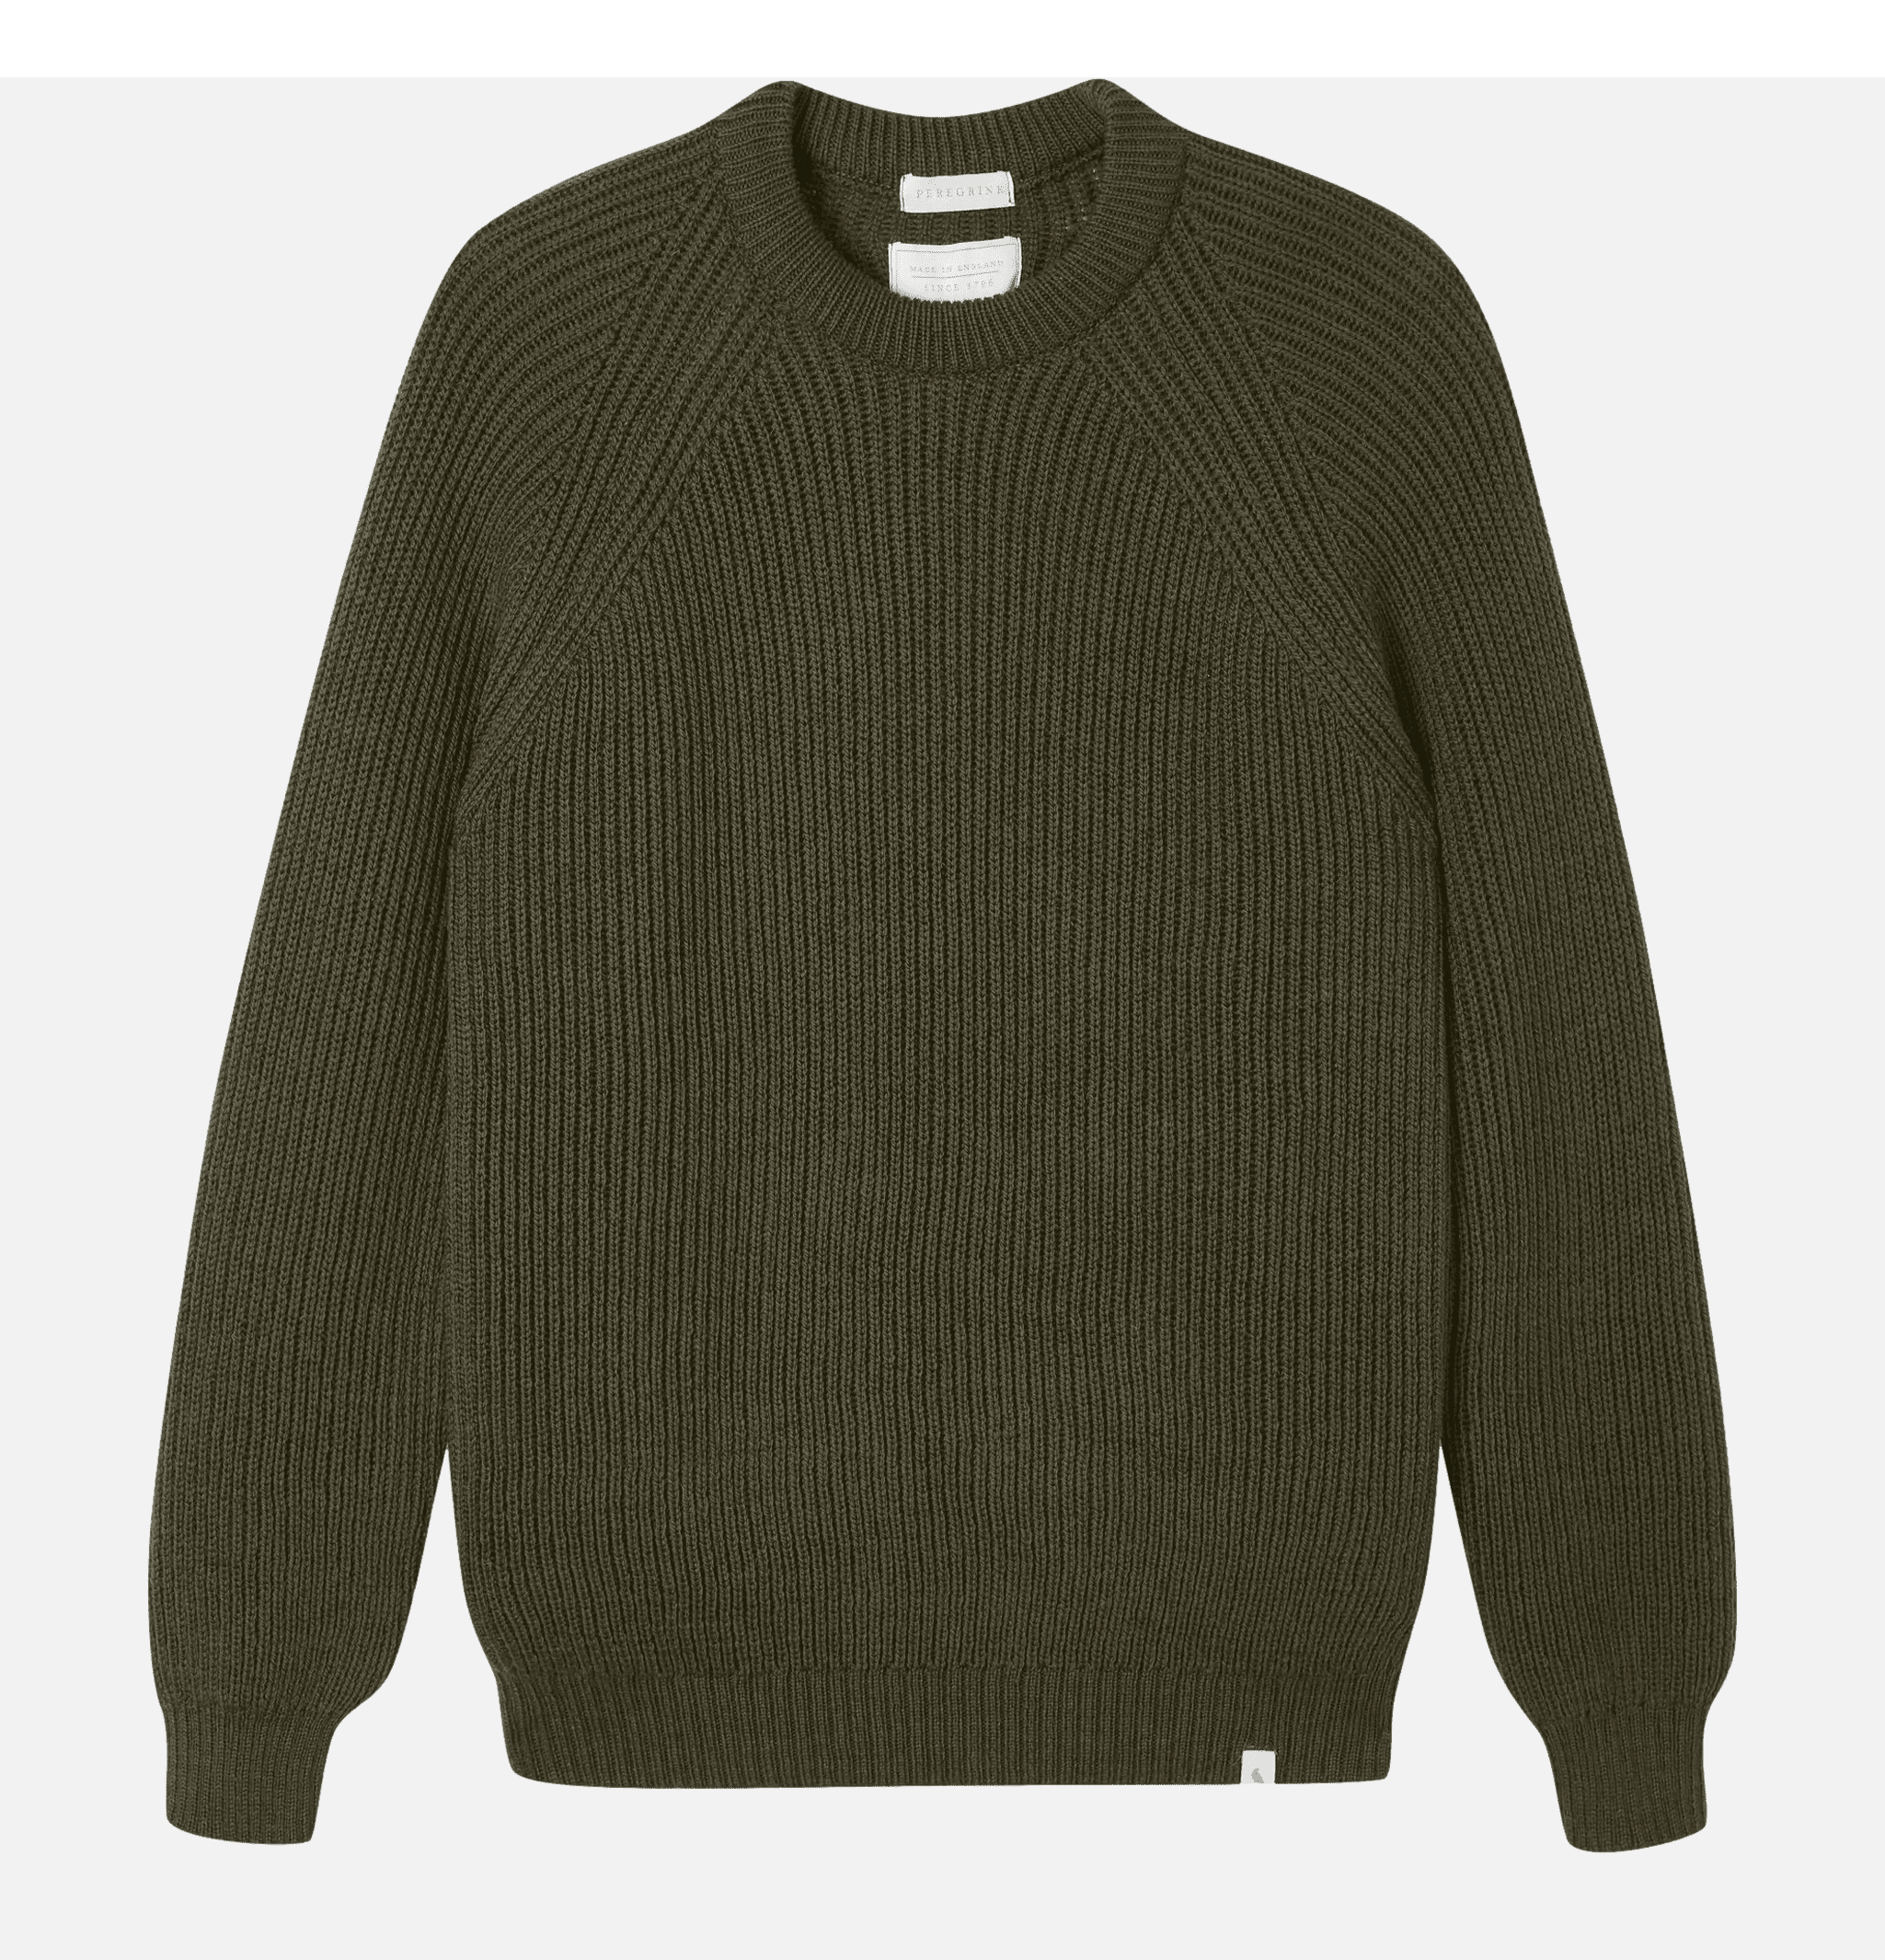 Peregrine Ford Crew Knit Olive